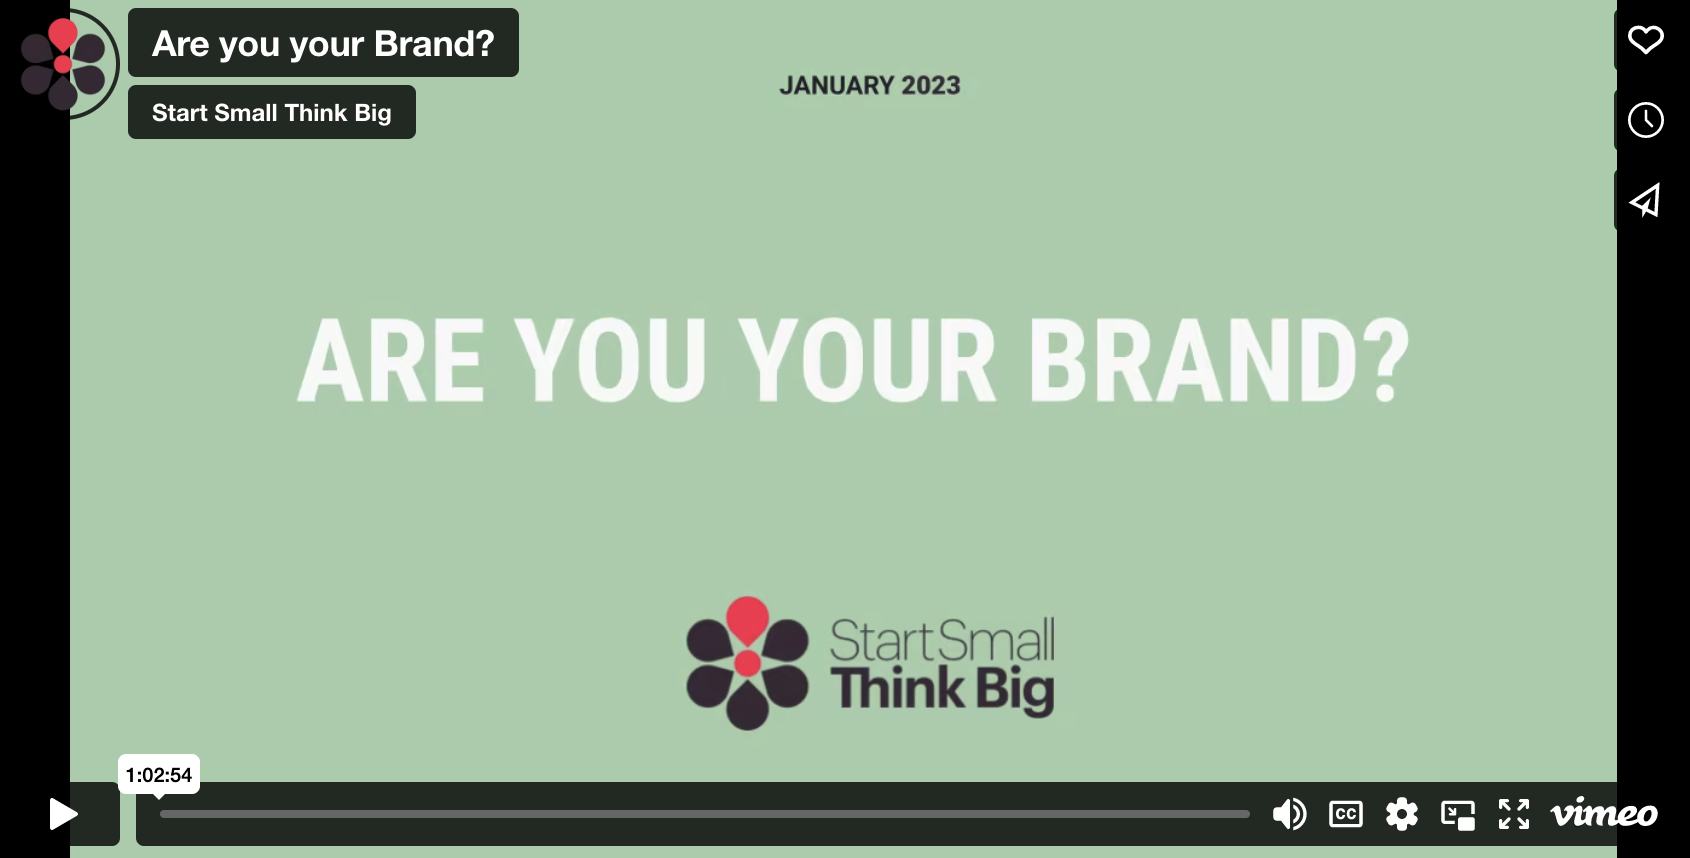 Are you your Brand?